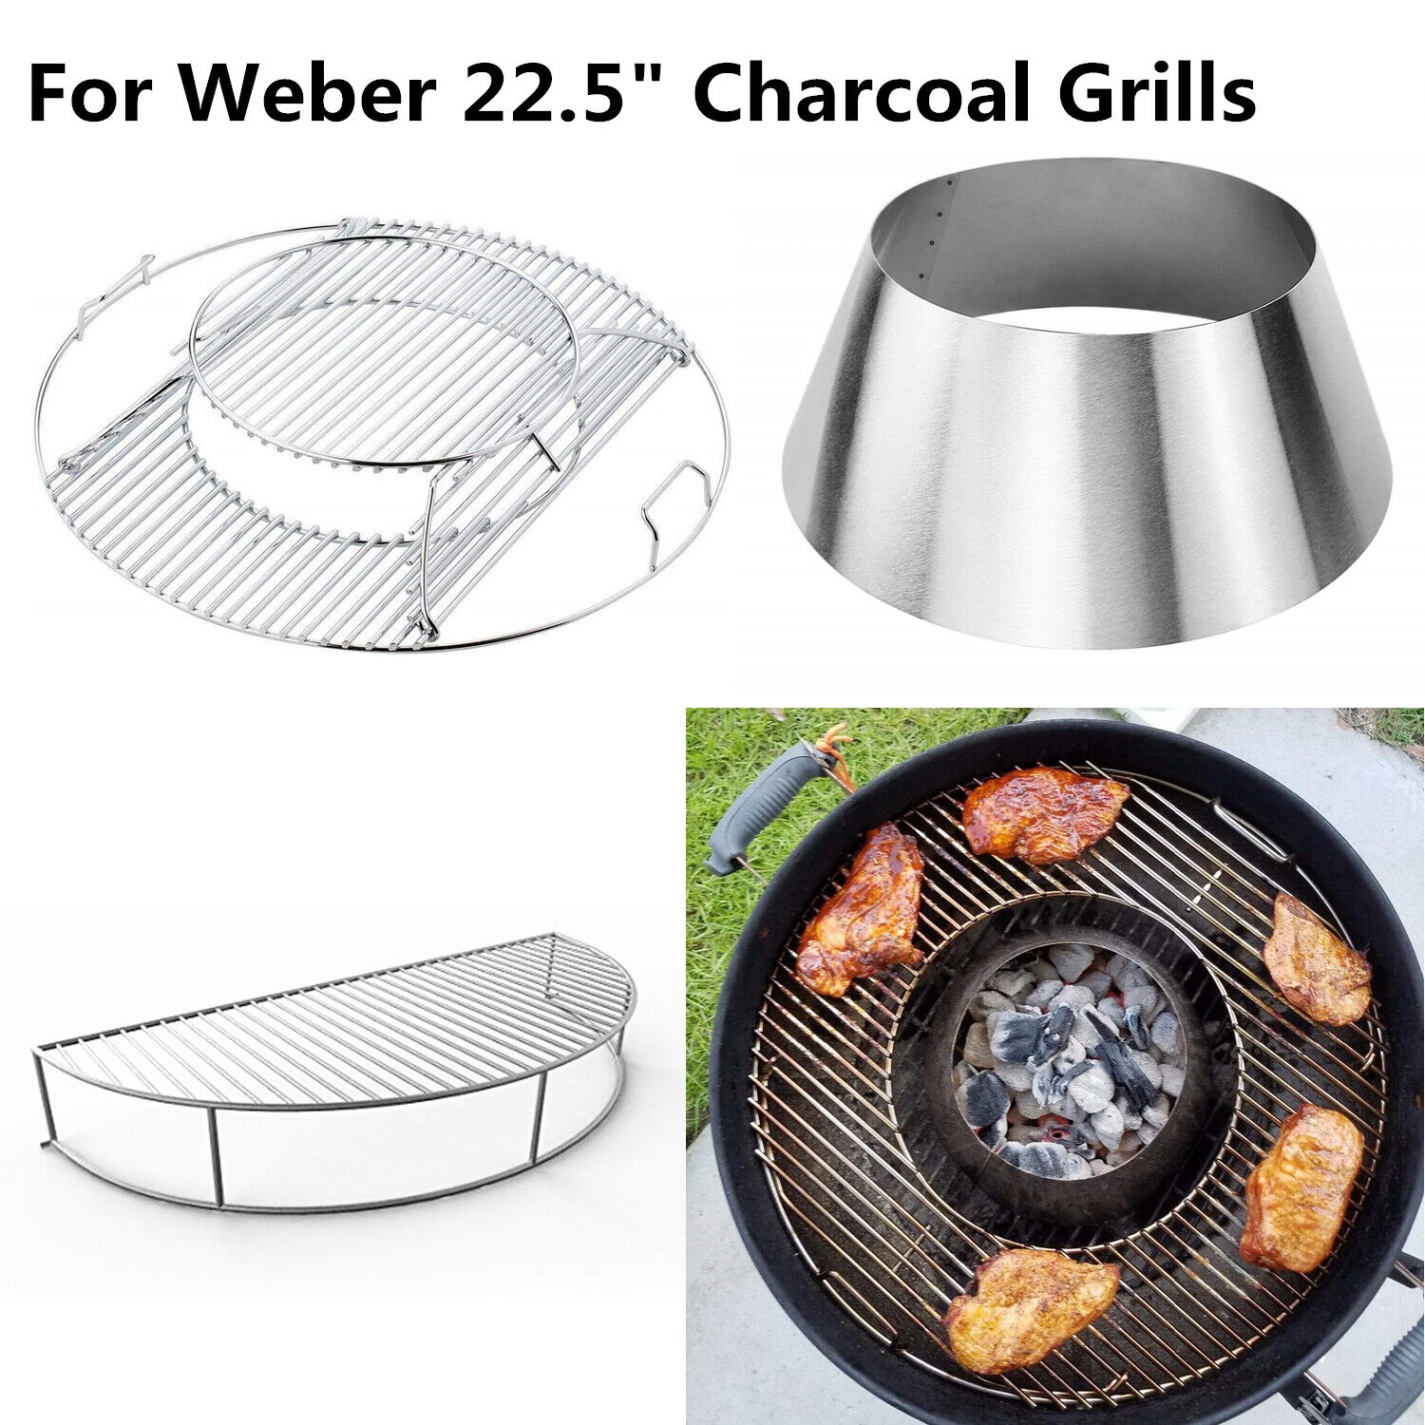 weber charcoal grill accessories Niche Utama Home Grill Charcoal Holder Cooking Grate Warming Rack for